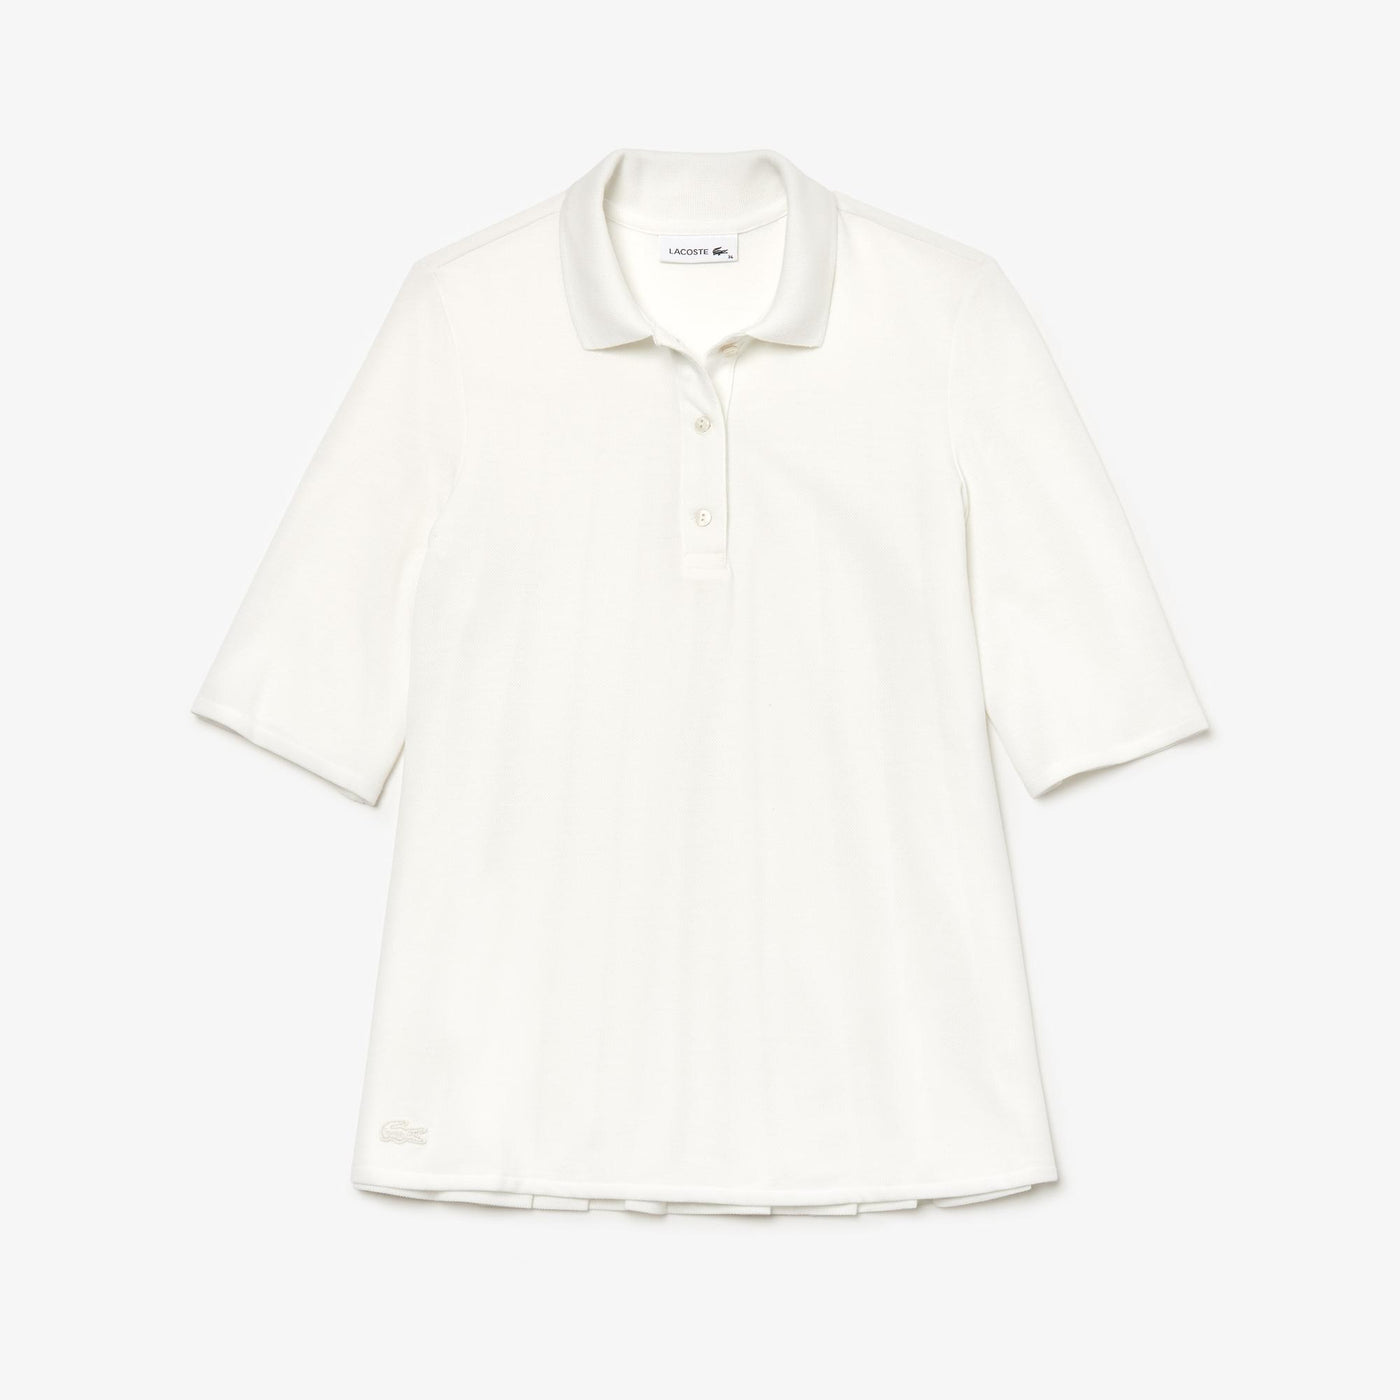 Shop The Latest Collection Of Outlet - Lacoste Women'S Short Sleeve Pique Polo - Pf7652 In Lebanon